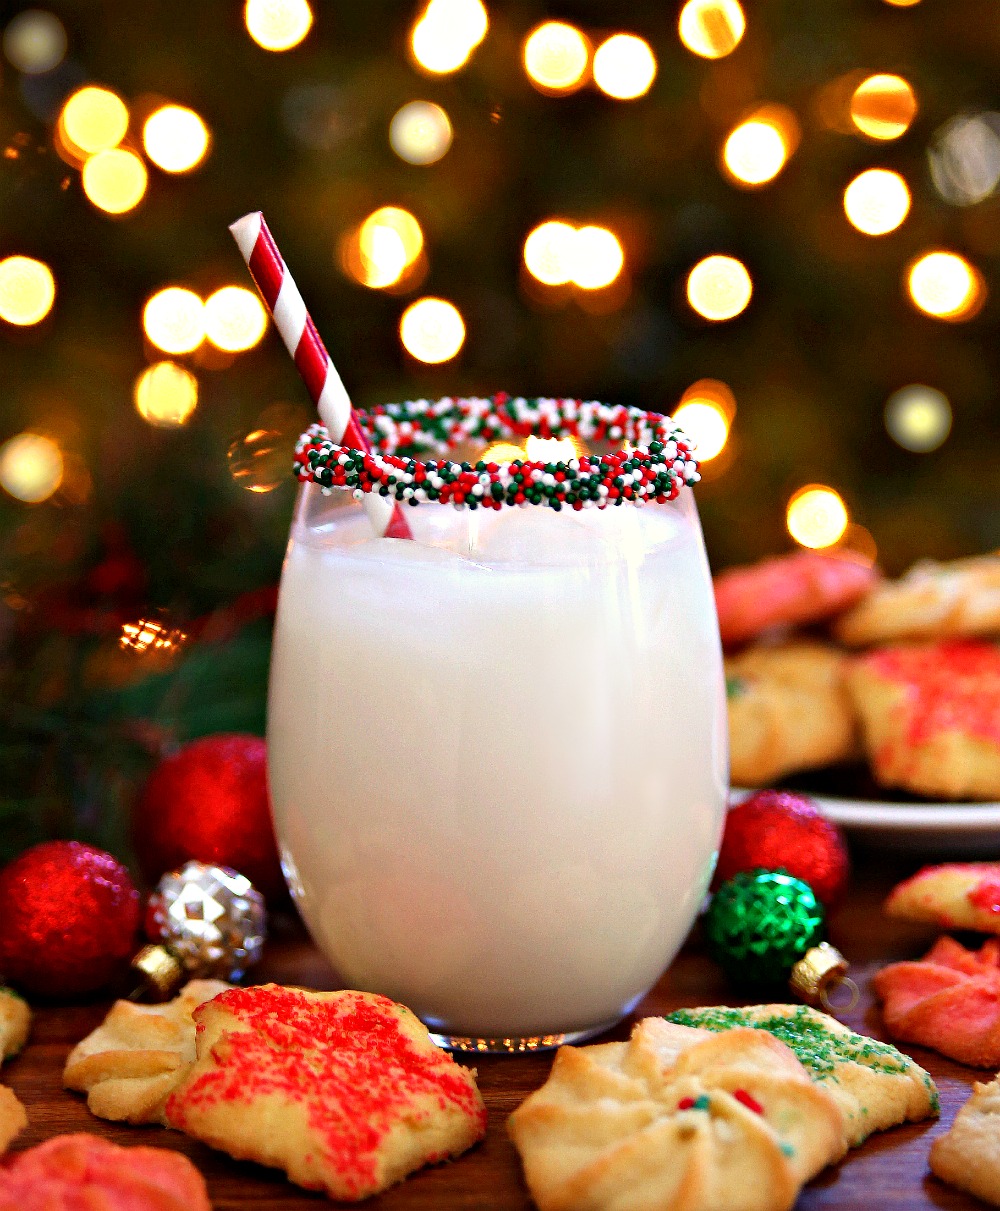 Christmas Cookie Cocktail